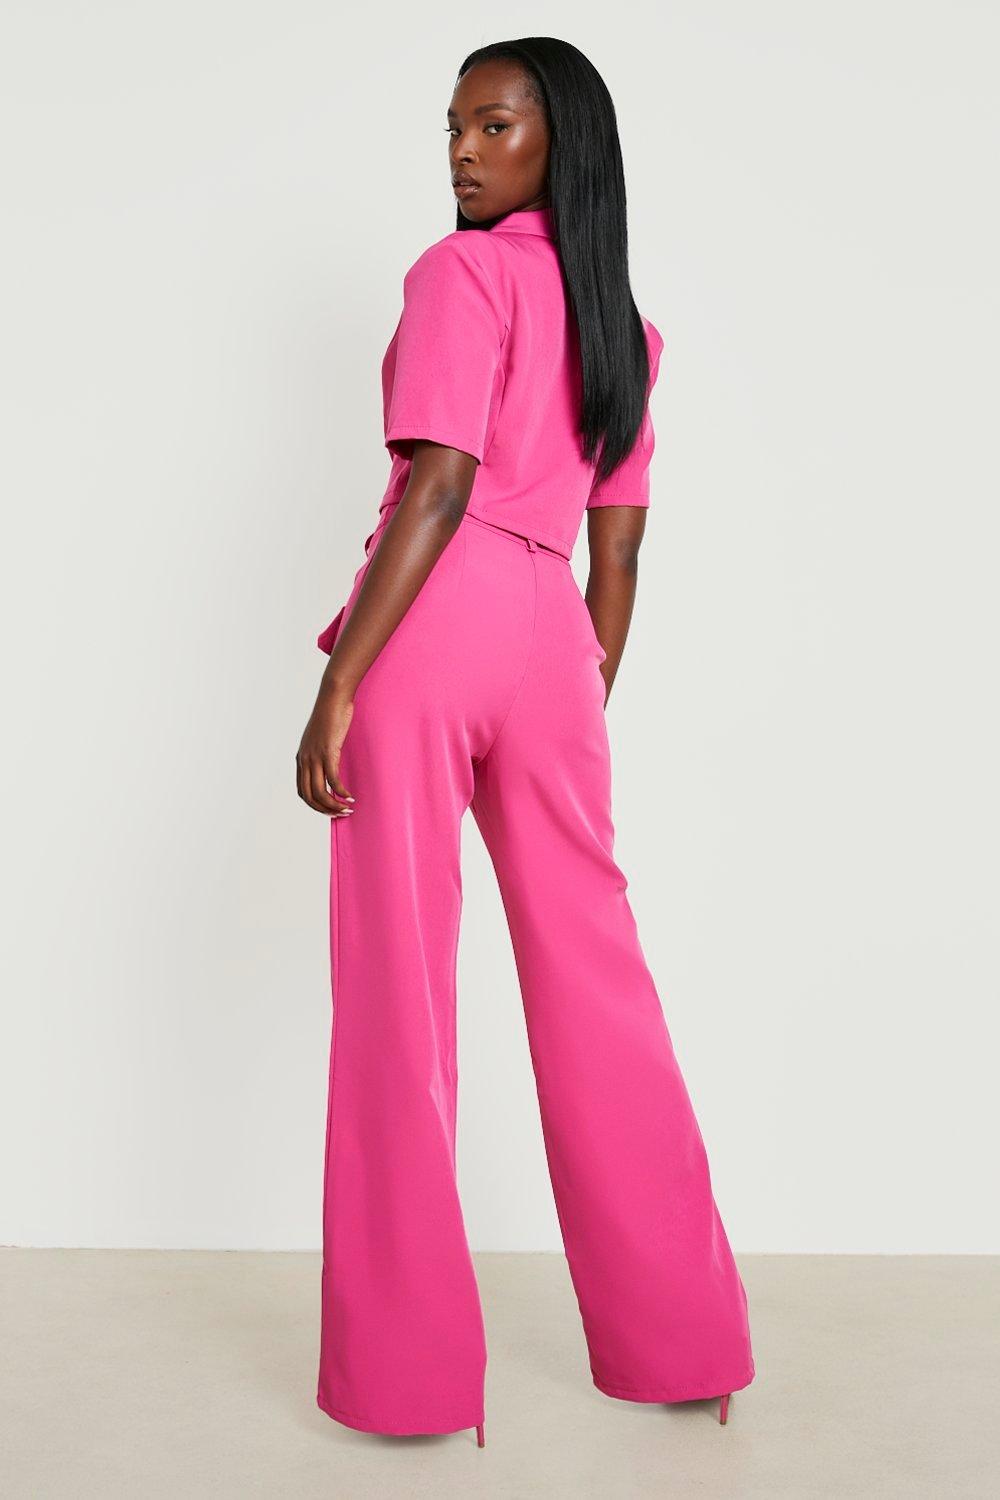 Best Pink Flare Pant Boohoo